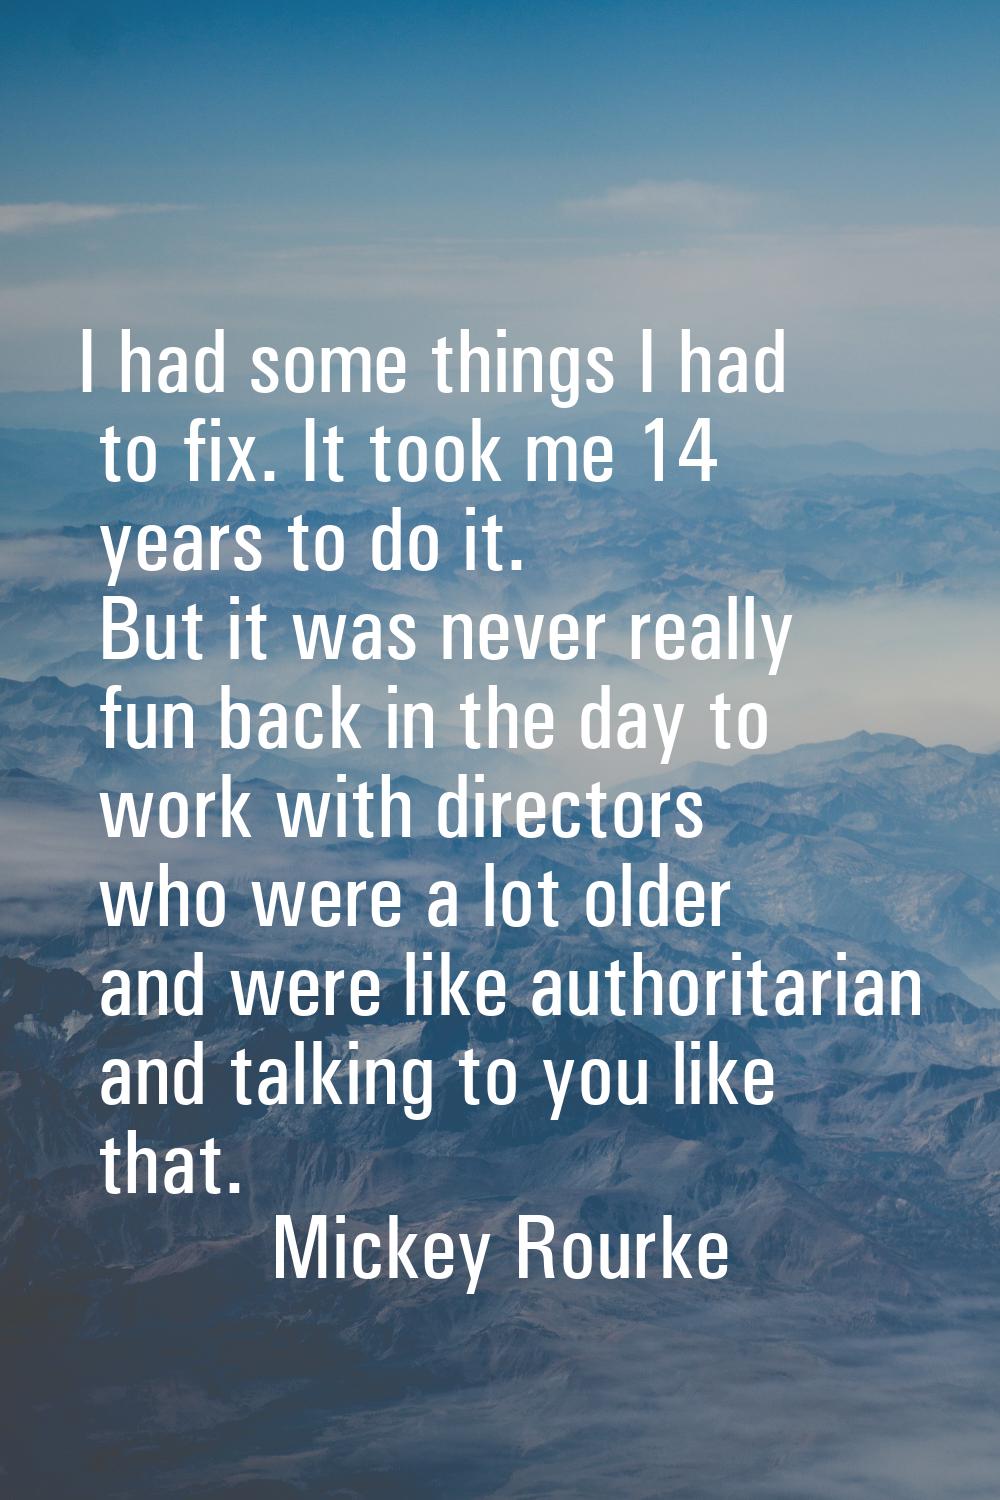 I had some things I had to fix. It took me 14 years to do it. But it was never really fun back in t